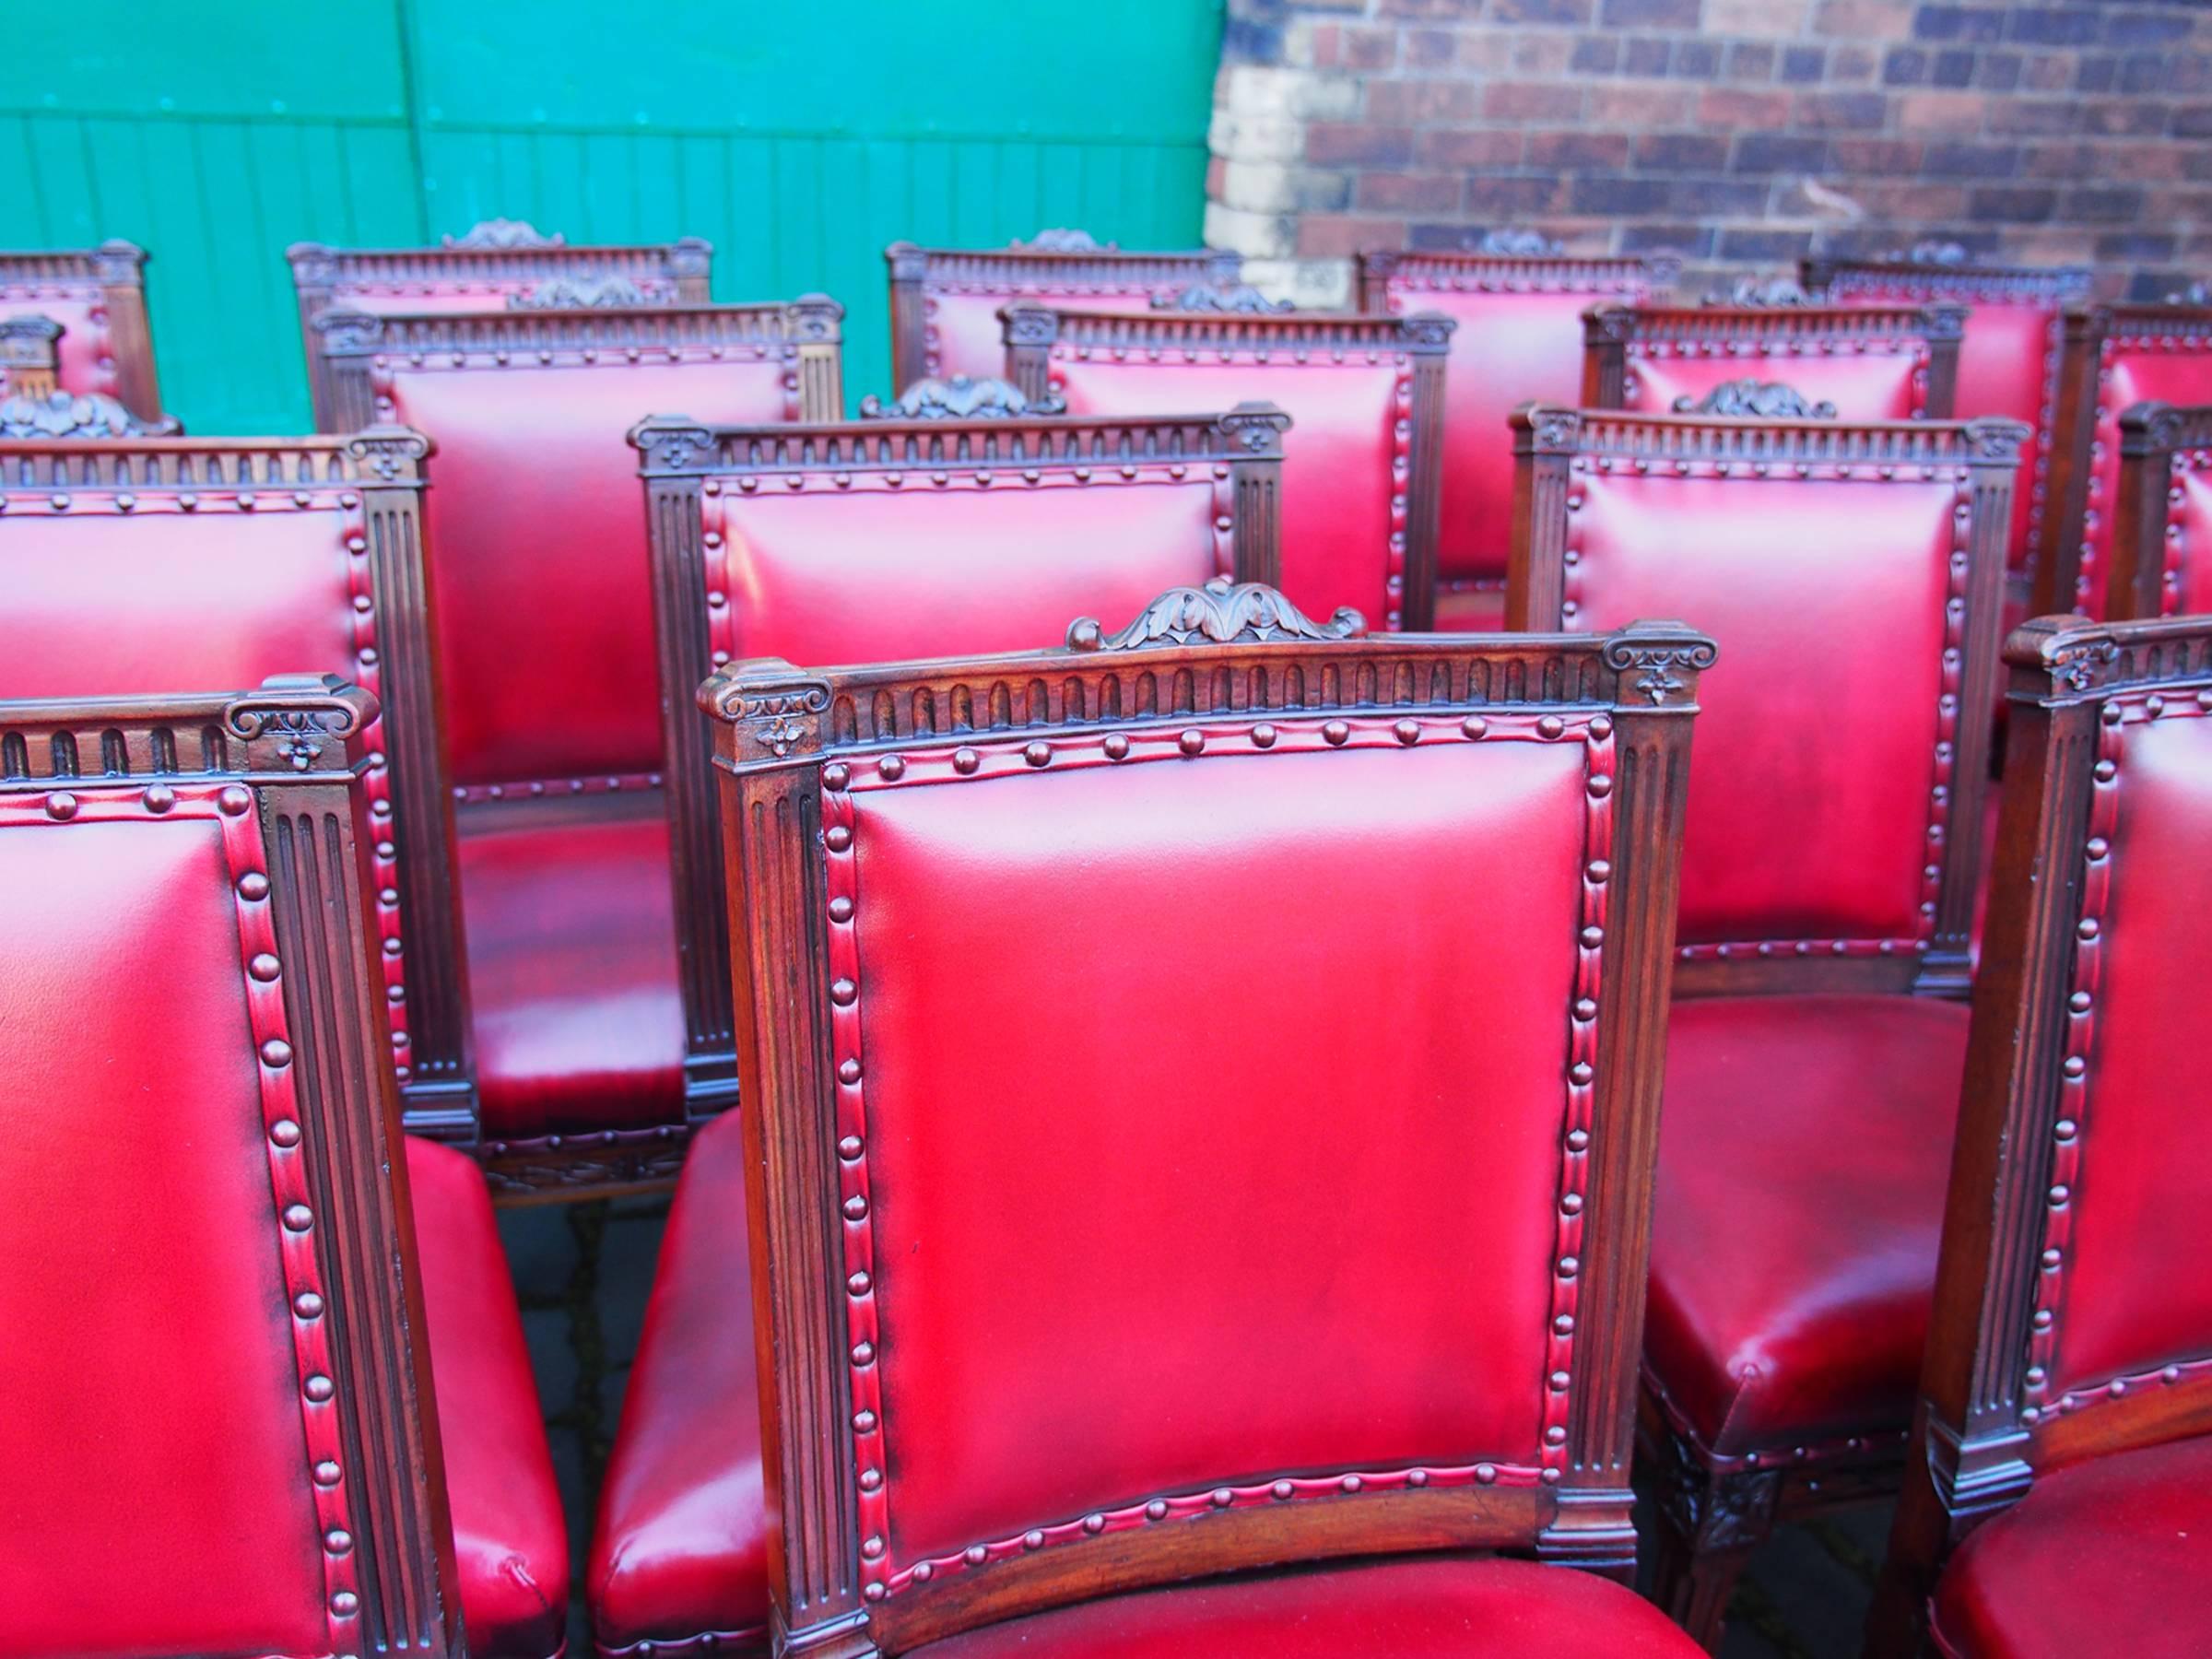 Set of 18 mahogany dining room chairs by Morison & Co of Edinburgh, circa 1900. This set of chairs have been reupholstered with deep buttoned burgundy leather. The chairs have a carved top rail, fluted up-rights and the back legs are square and